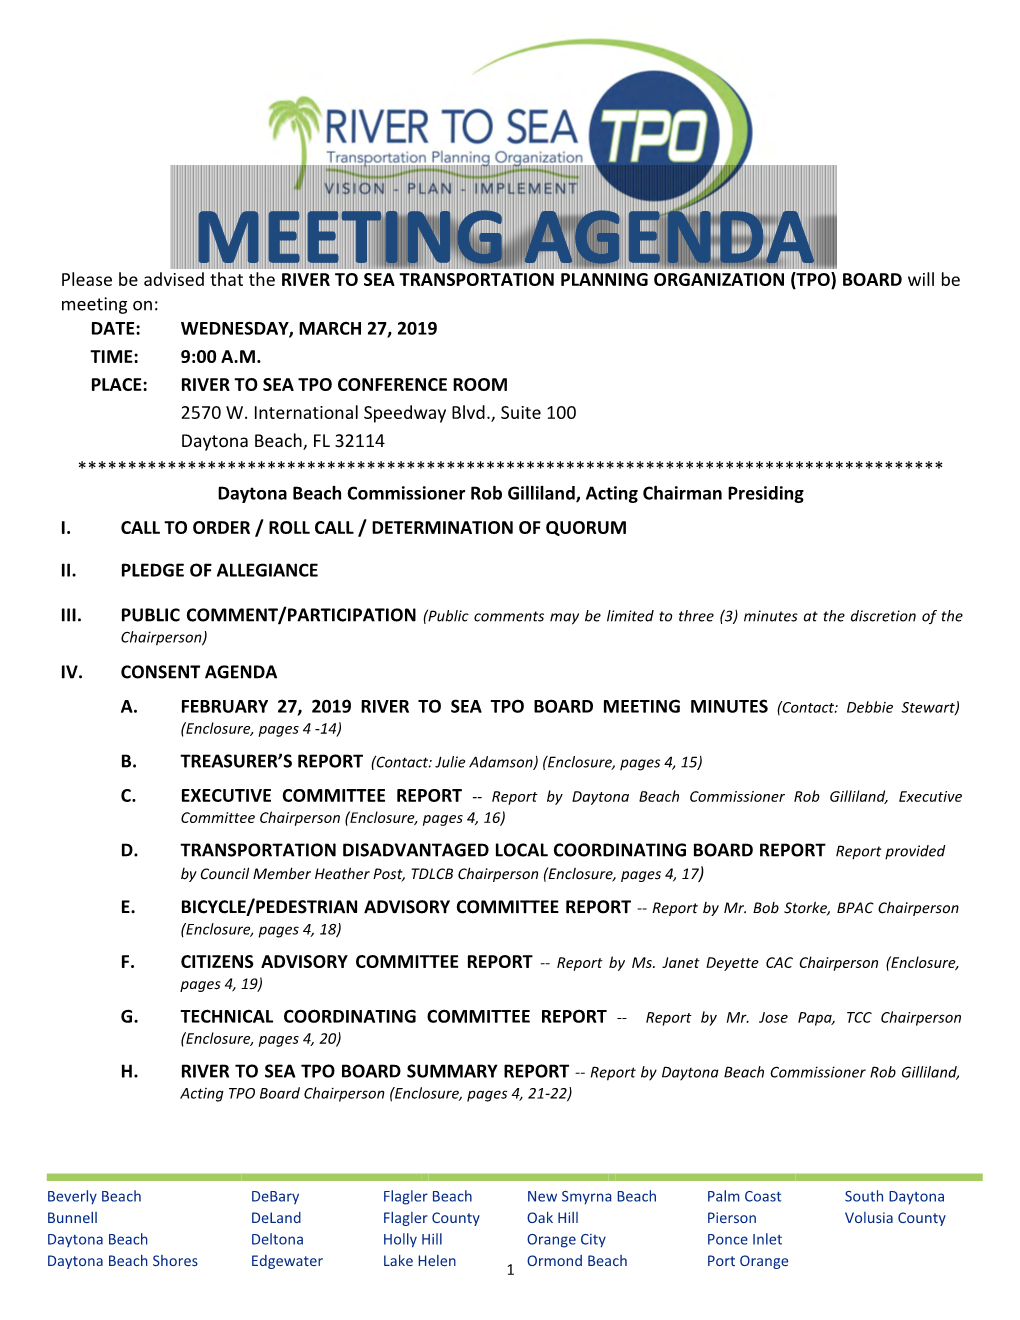 RIVER to SEA TRANSPORTATION PLANNING ORGANIZATION (TPO) BOARD Will Be Meeting On: DATE: WEDNESDAY, MARCH 27, 2019 TIME: 9:00 A.M